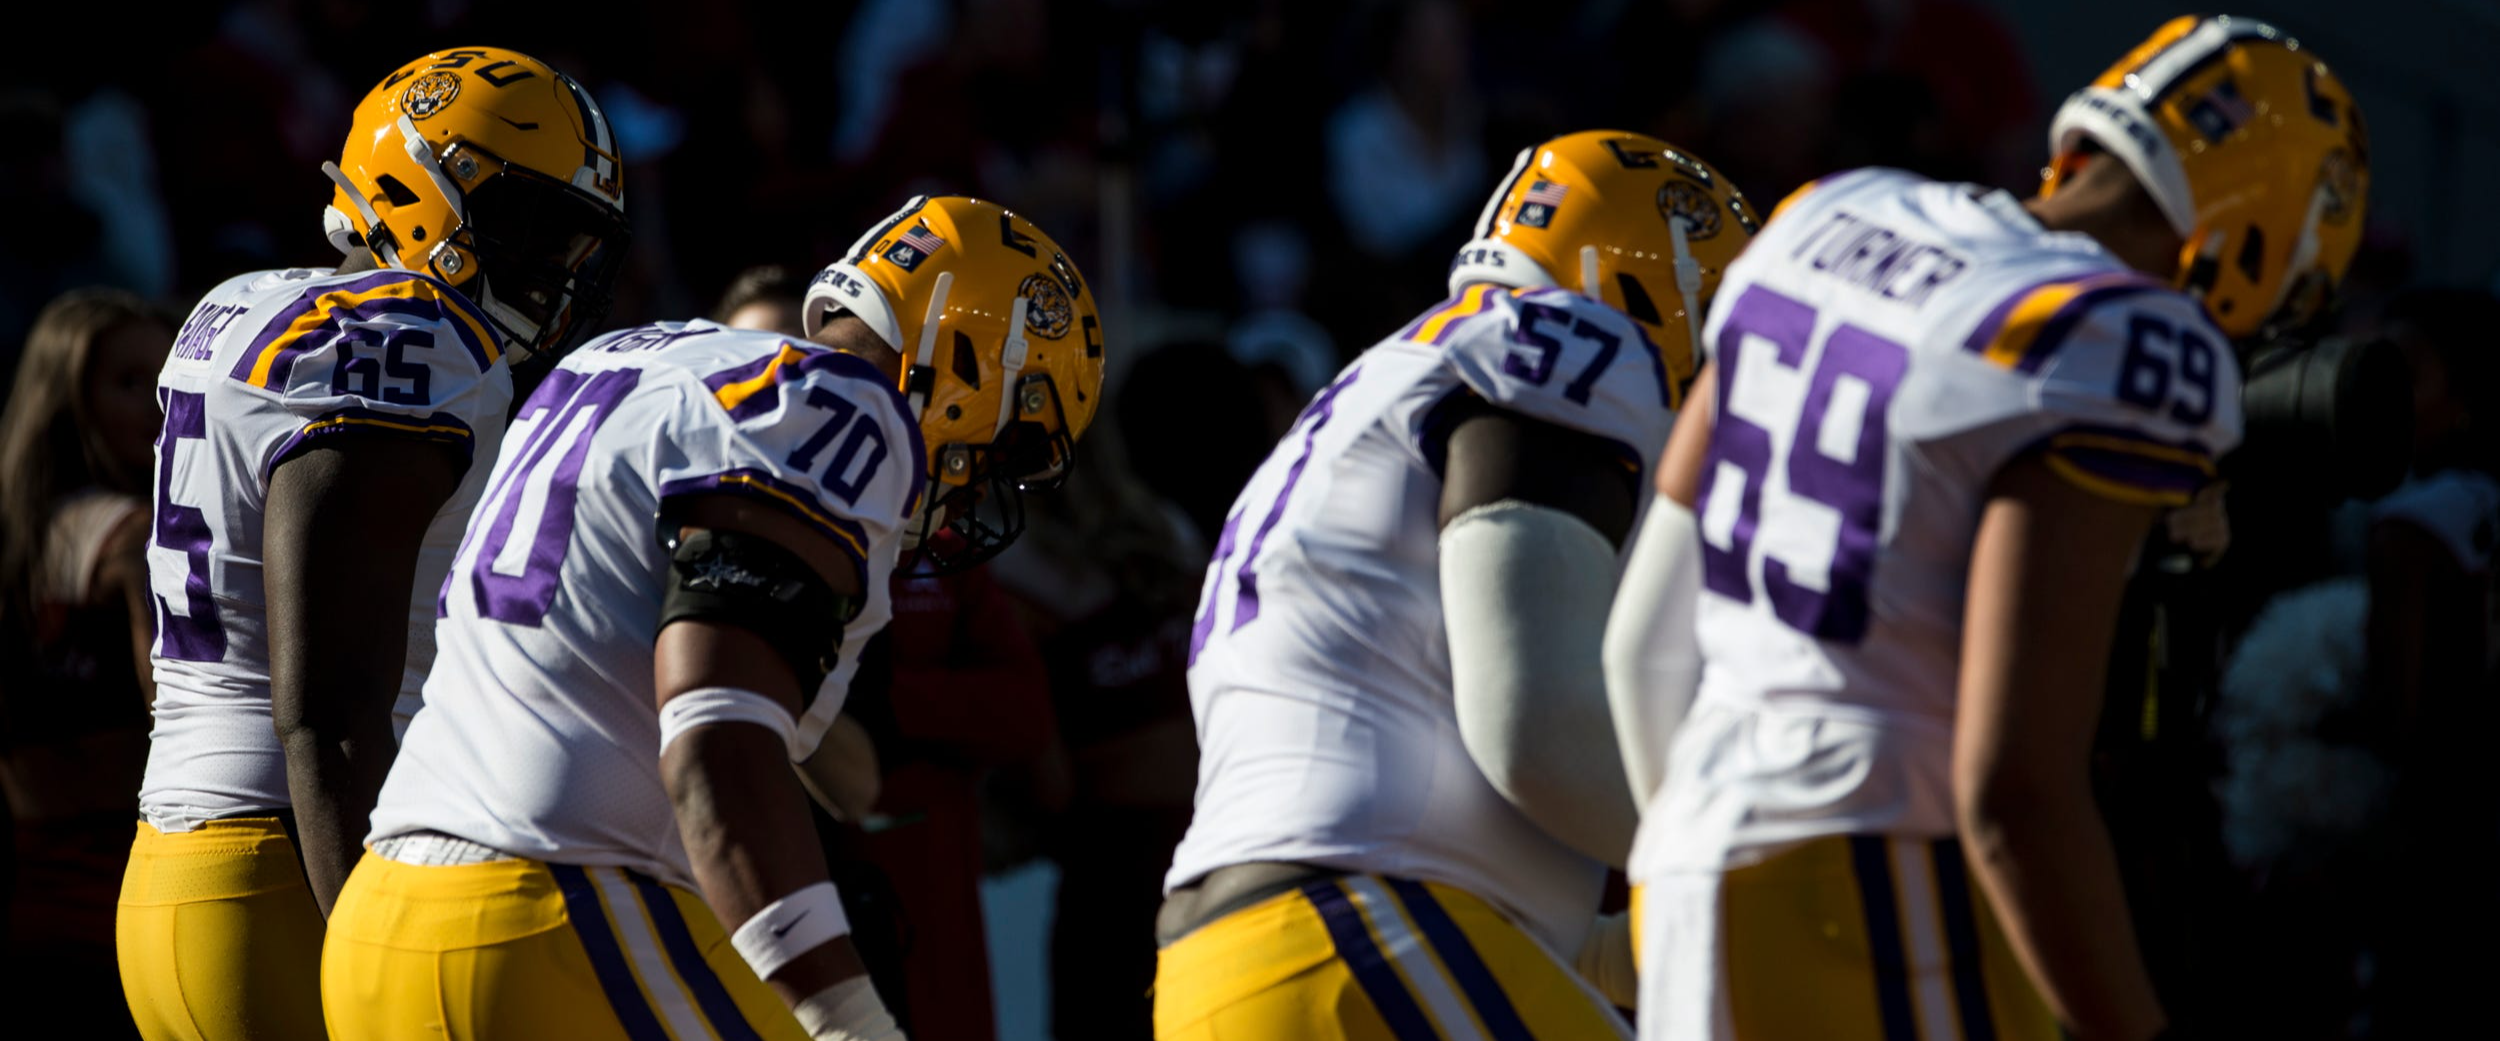 The Fall and Rise of LSU's Offensive Line